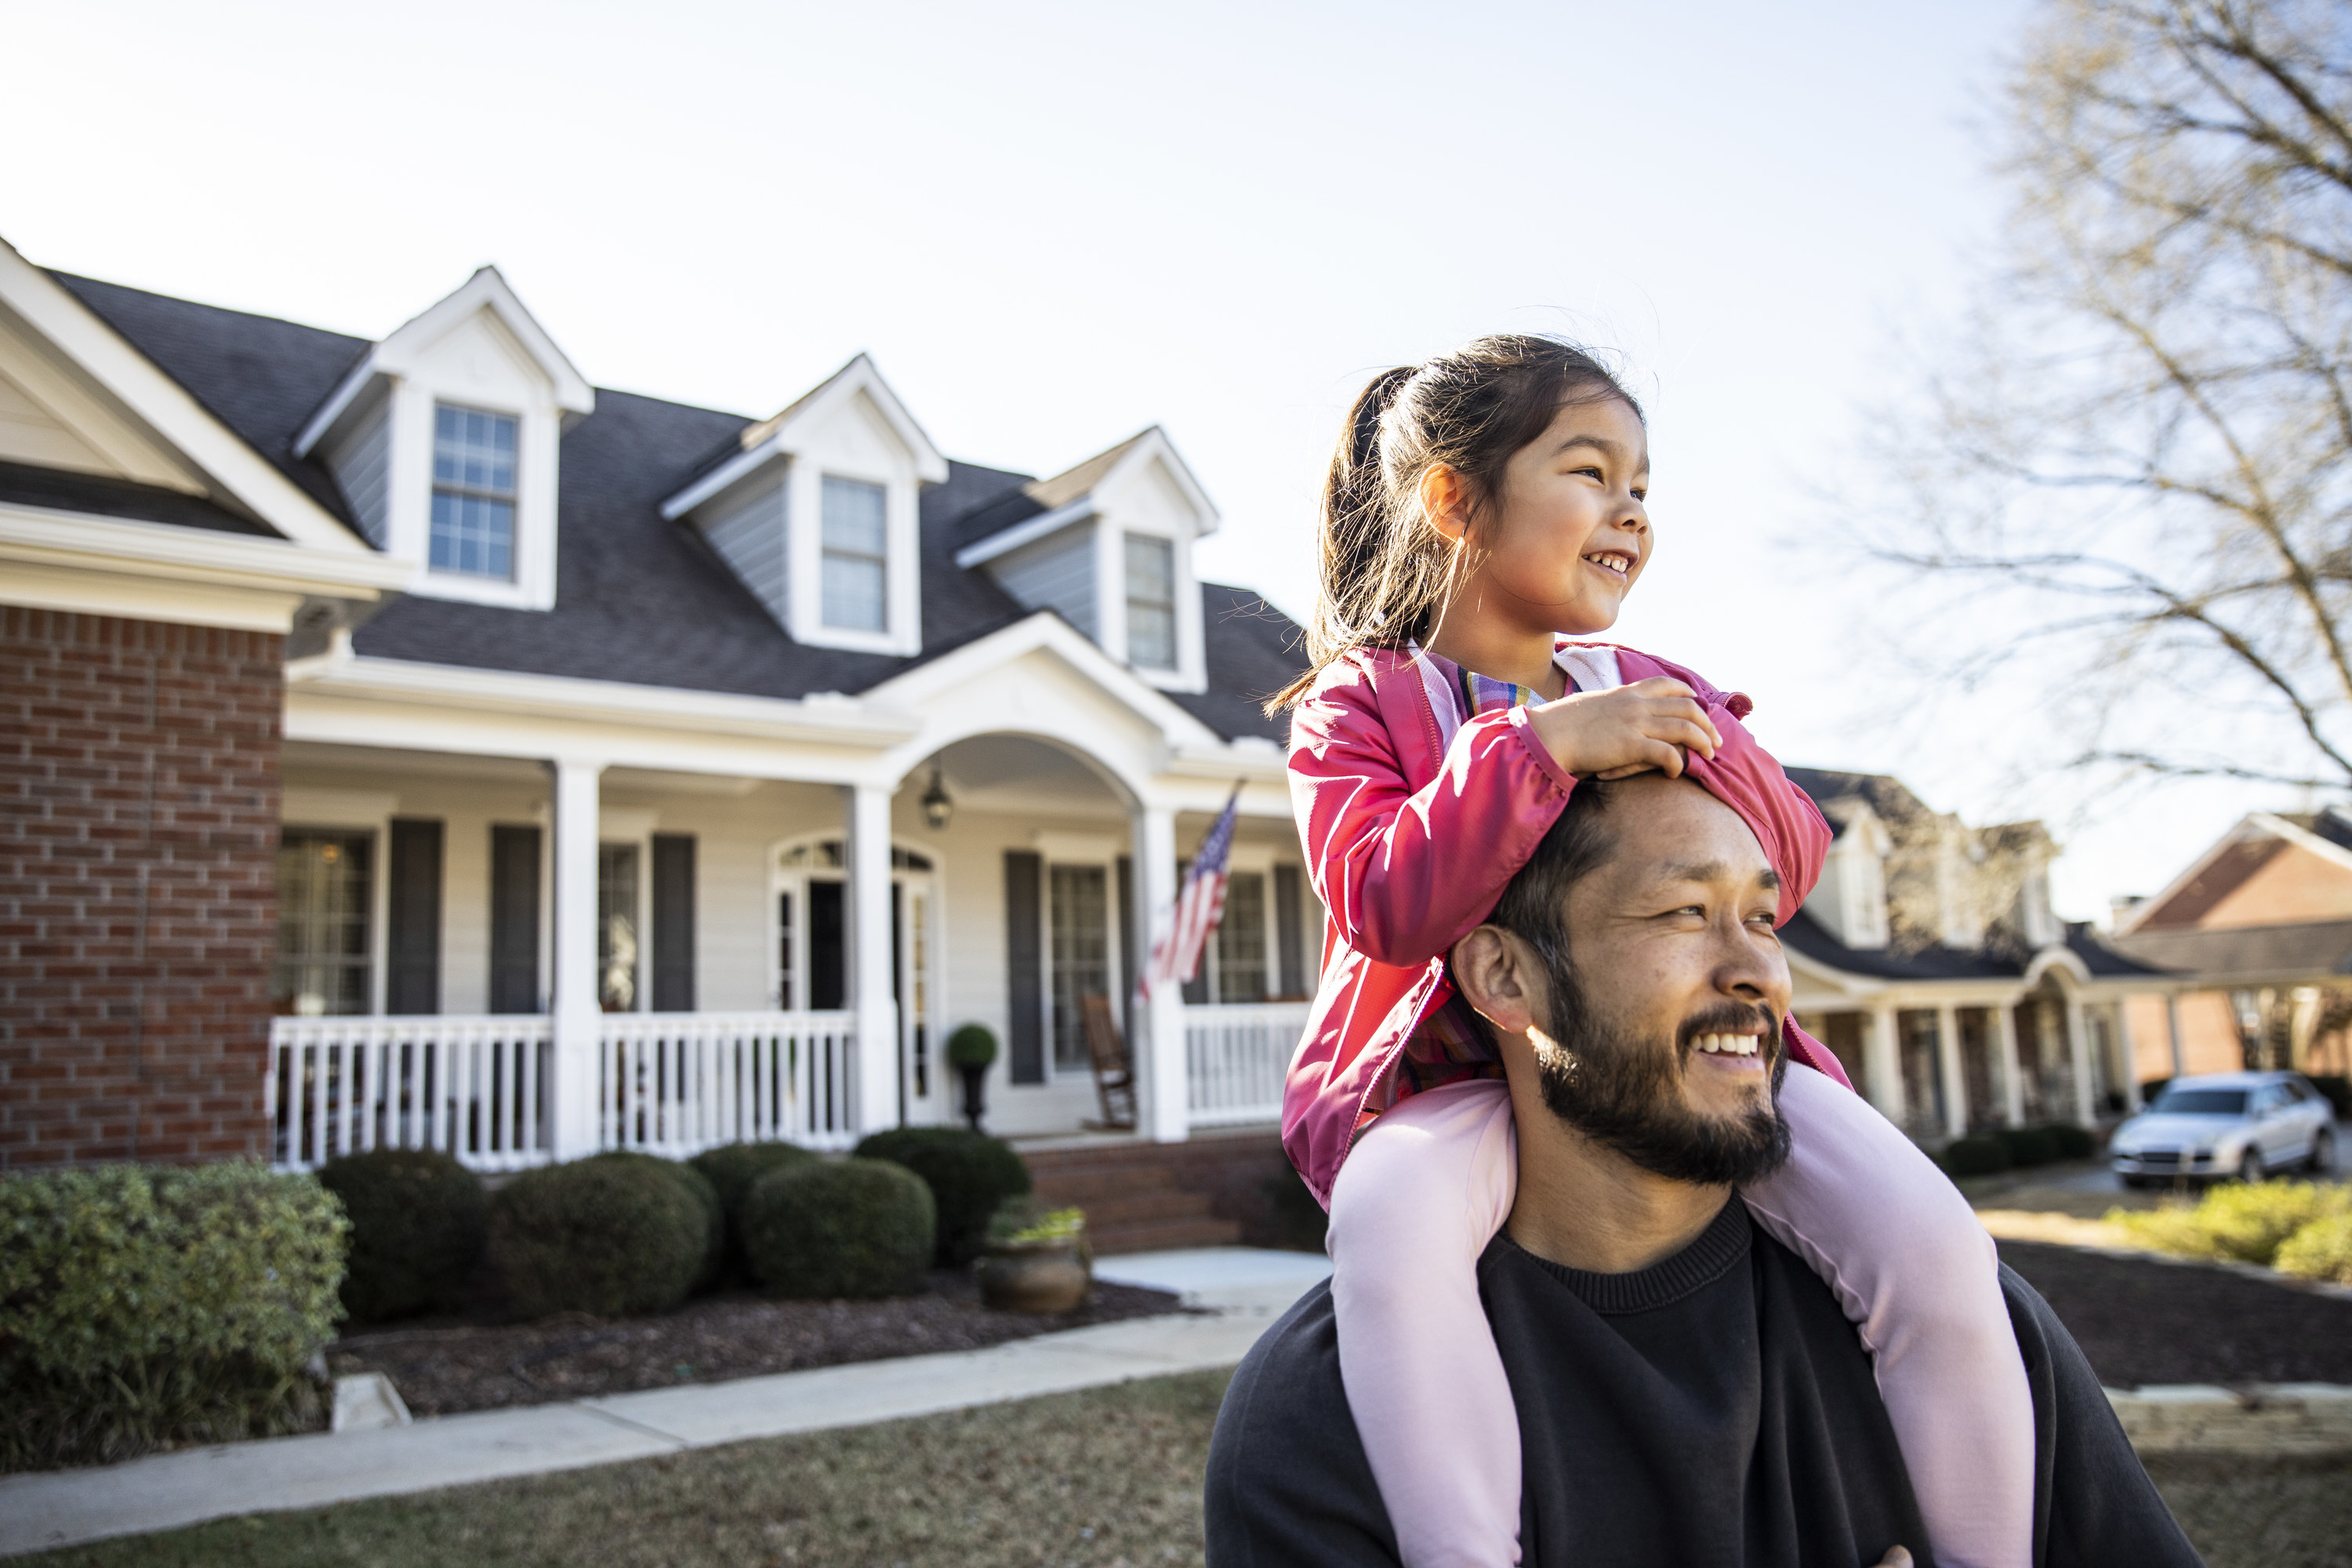 Dad giving young daughter a piggyback ride in front of a large suburban house